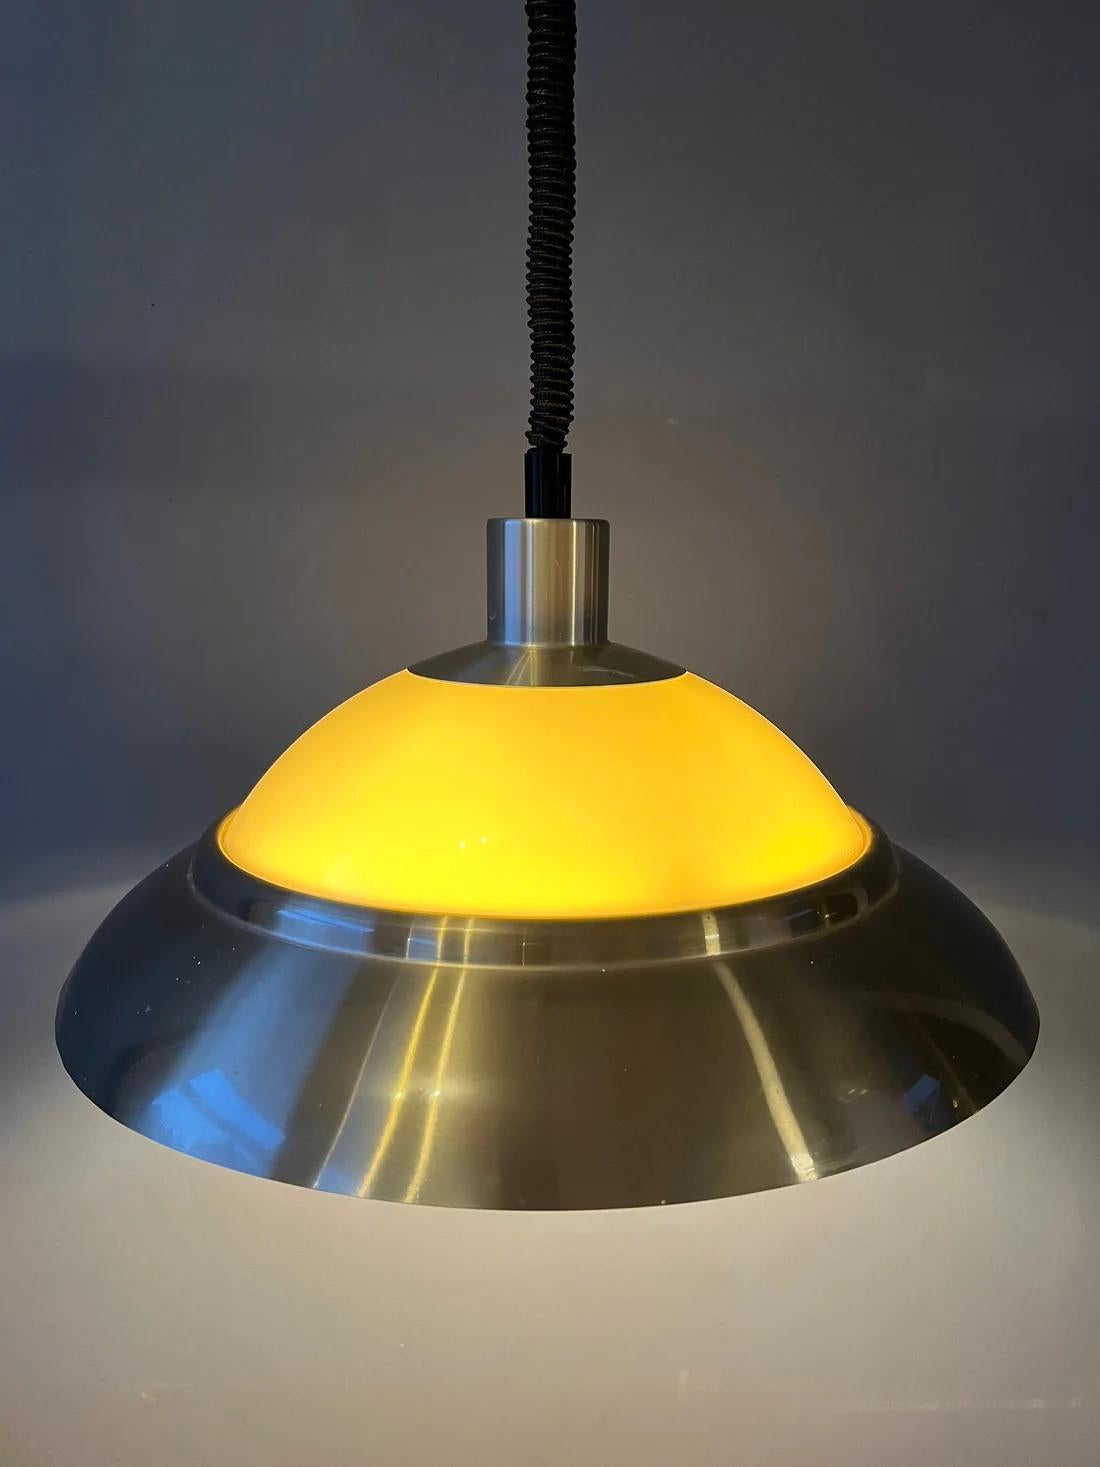 Vintage Dijkstra space age pendant light. The lamp consists of a aluminium and plexiglass parts, creating a nice spread of light. The lamp requires one E27/26 (standard) lightbulb.

Dimensions:
ø Shade: 37 cm
Height (Shade): 26 cm

Condition: Very